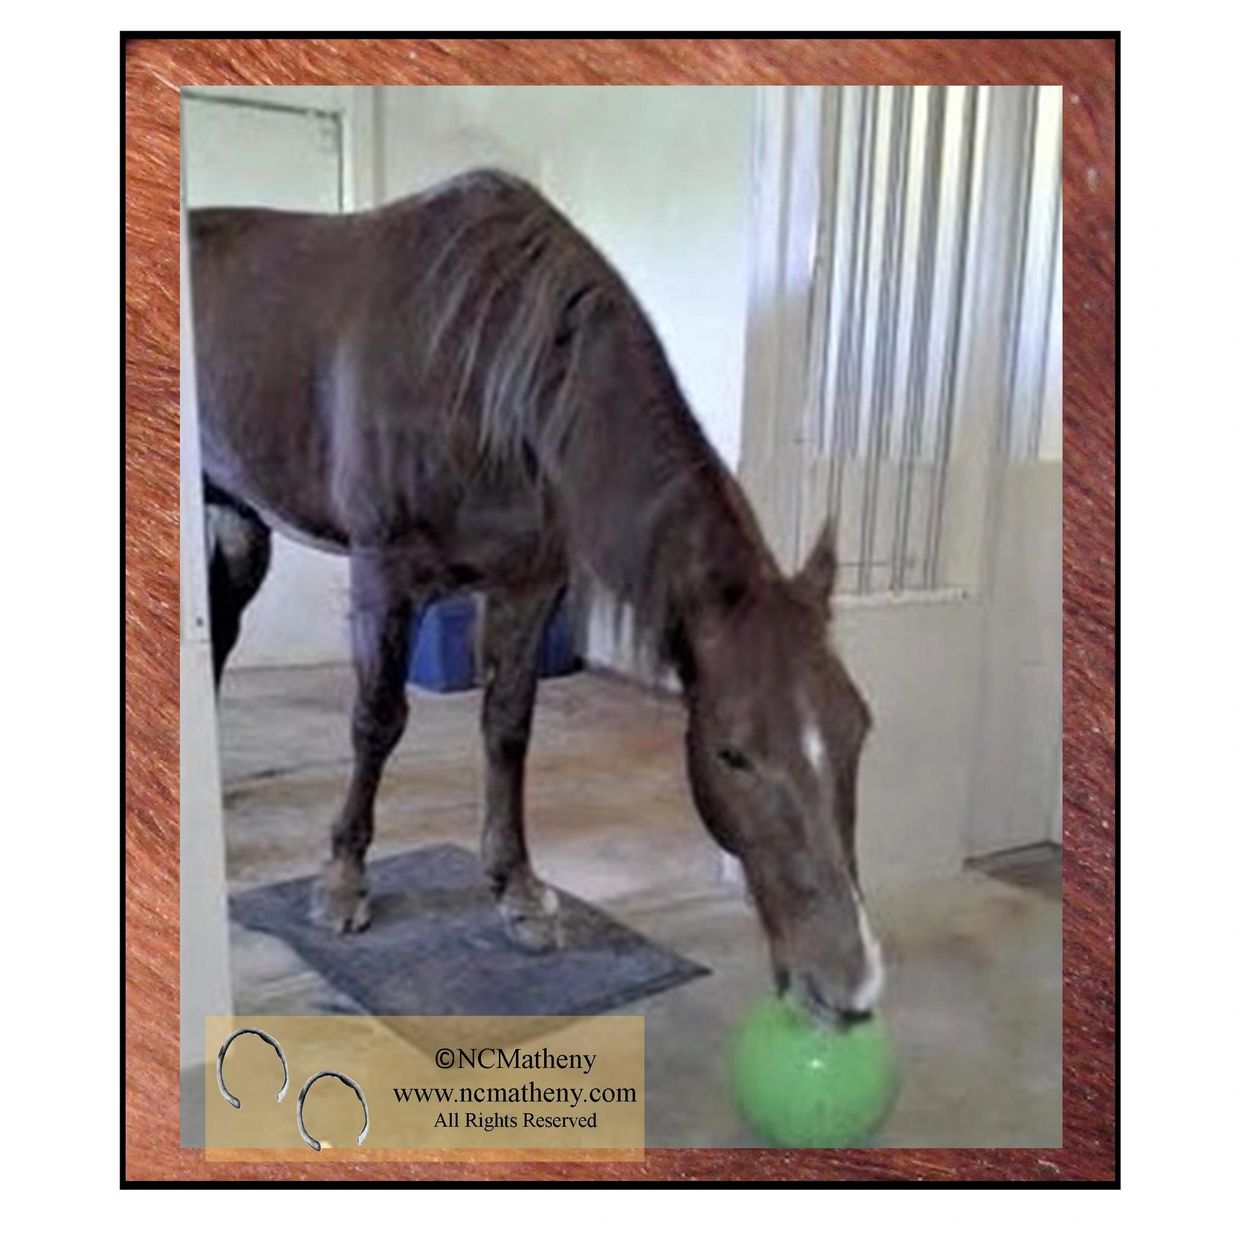 Casey home after colic surgery, nursing on his green Jolly Ball